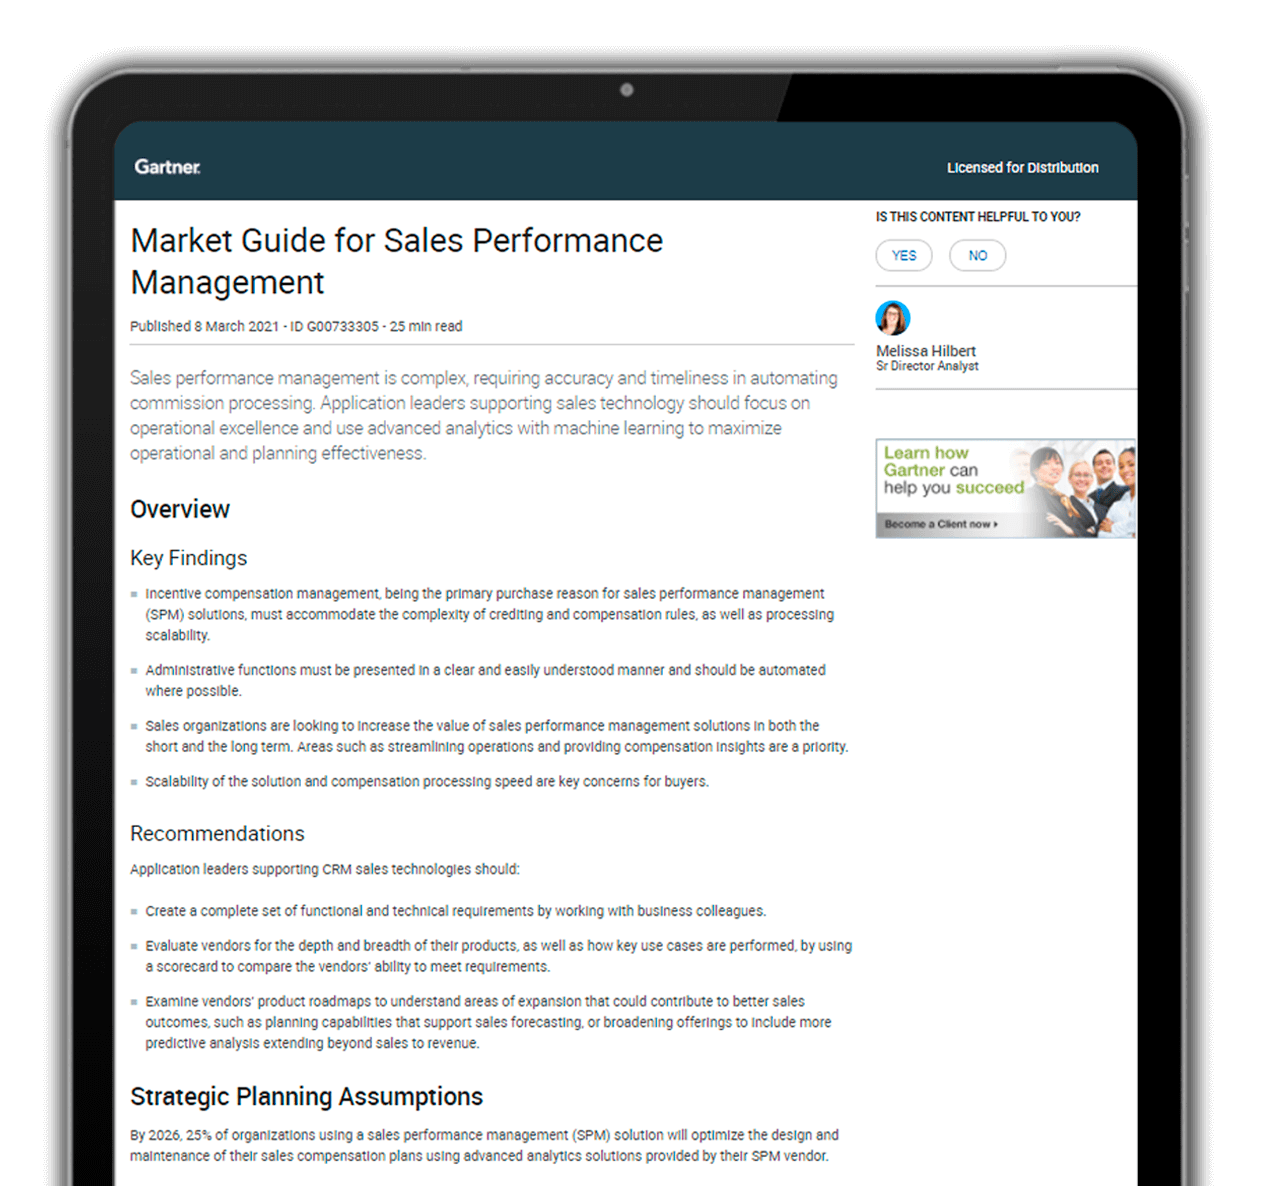 Blitz is proudly recognized by Gartner as Representative Vendor for Sales Performance in its 2021 Market Guide